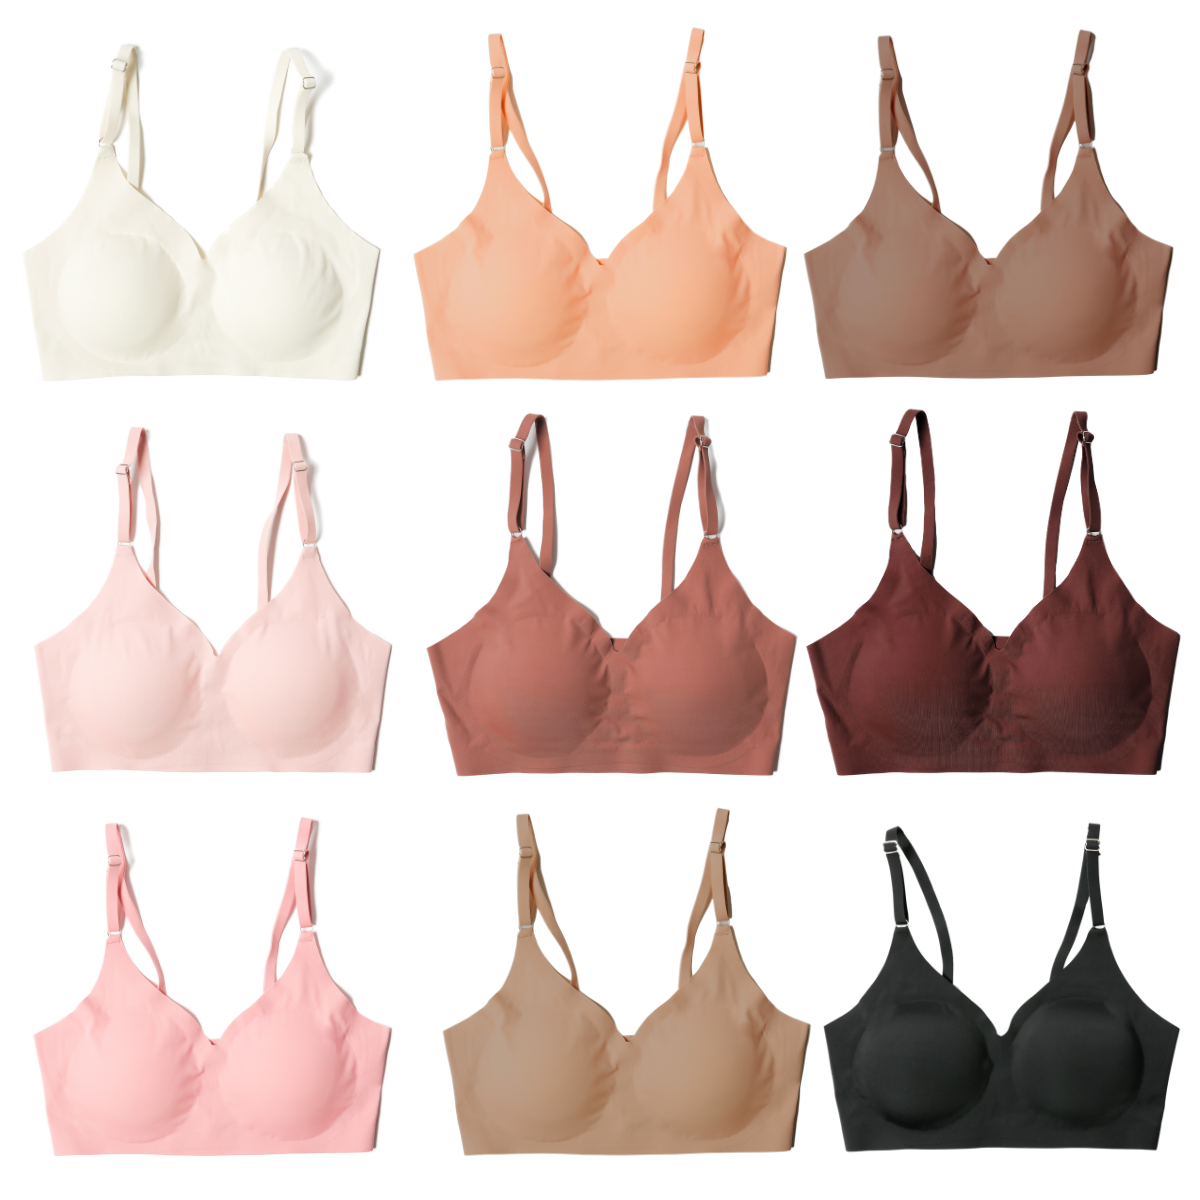 Women's Lace Silky Underwear Imported Lace Seamless Soft Bra for Daily Wear Sports  Bra 48 Dark Skin Color 